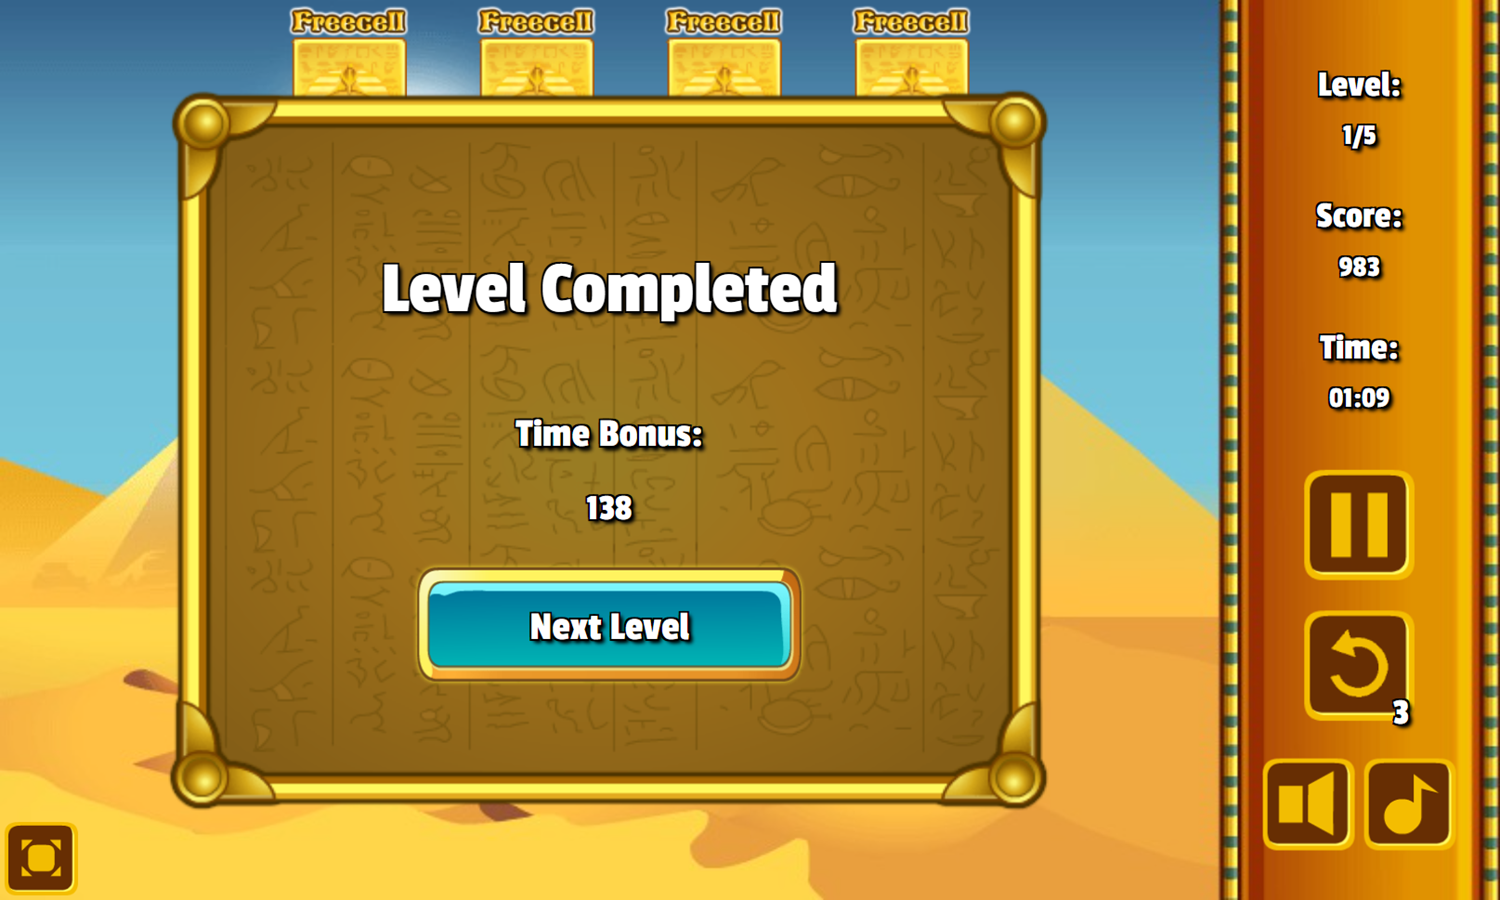 Freecell Giza Solitaire Level Completed Screenshot.